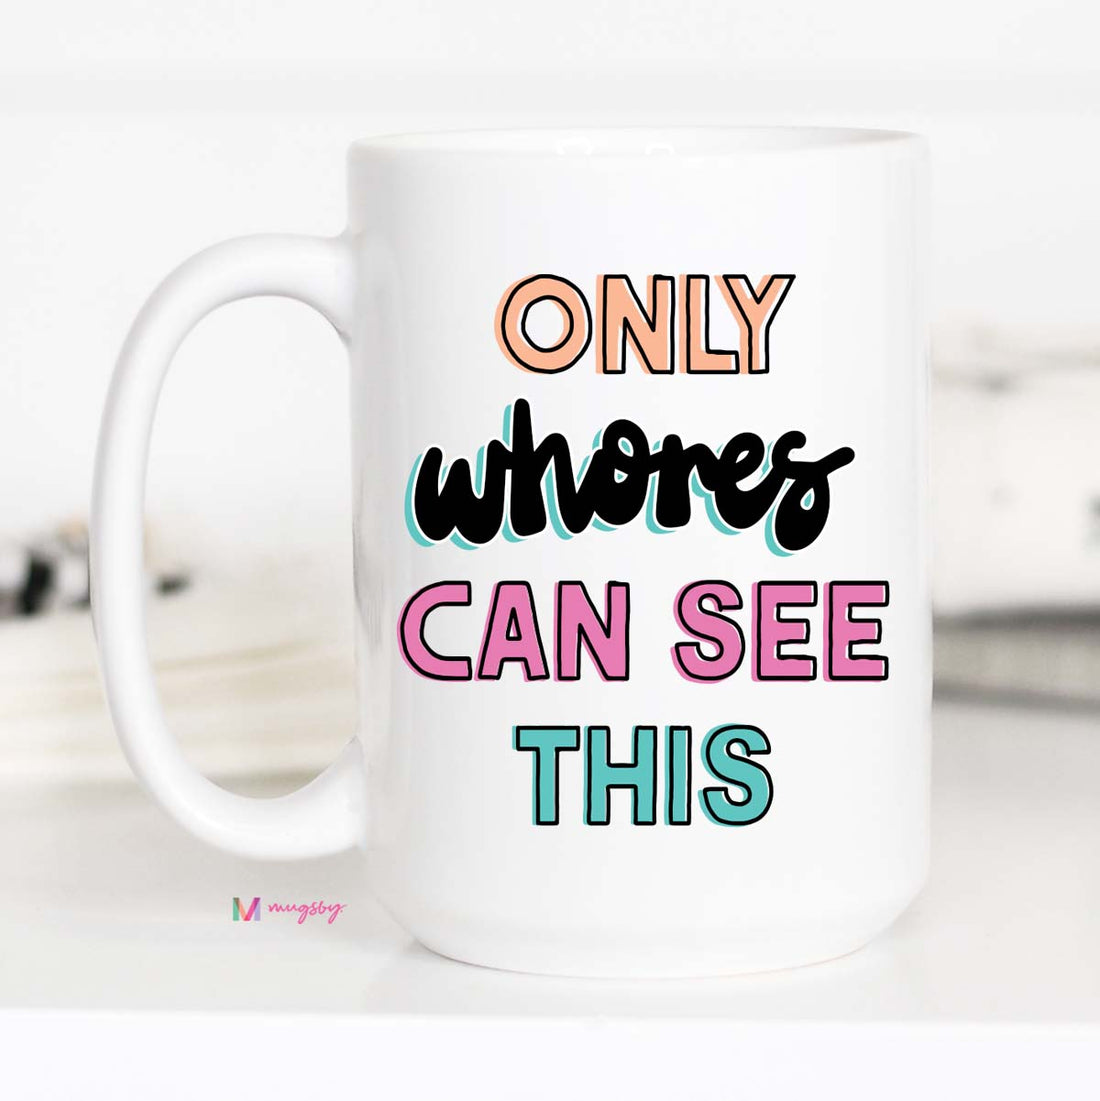 Only Whores Can See This Coffee Mug